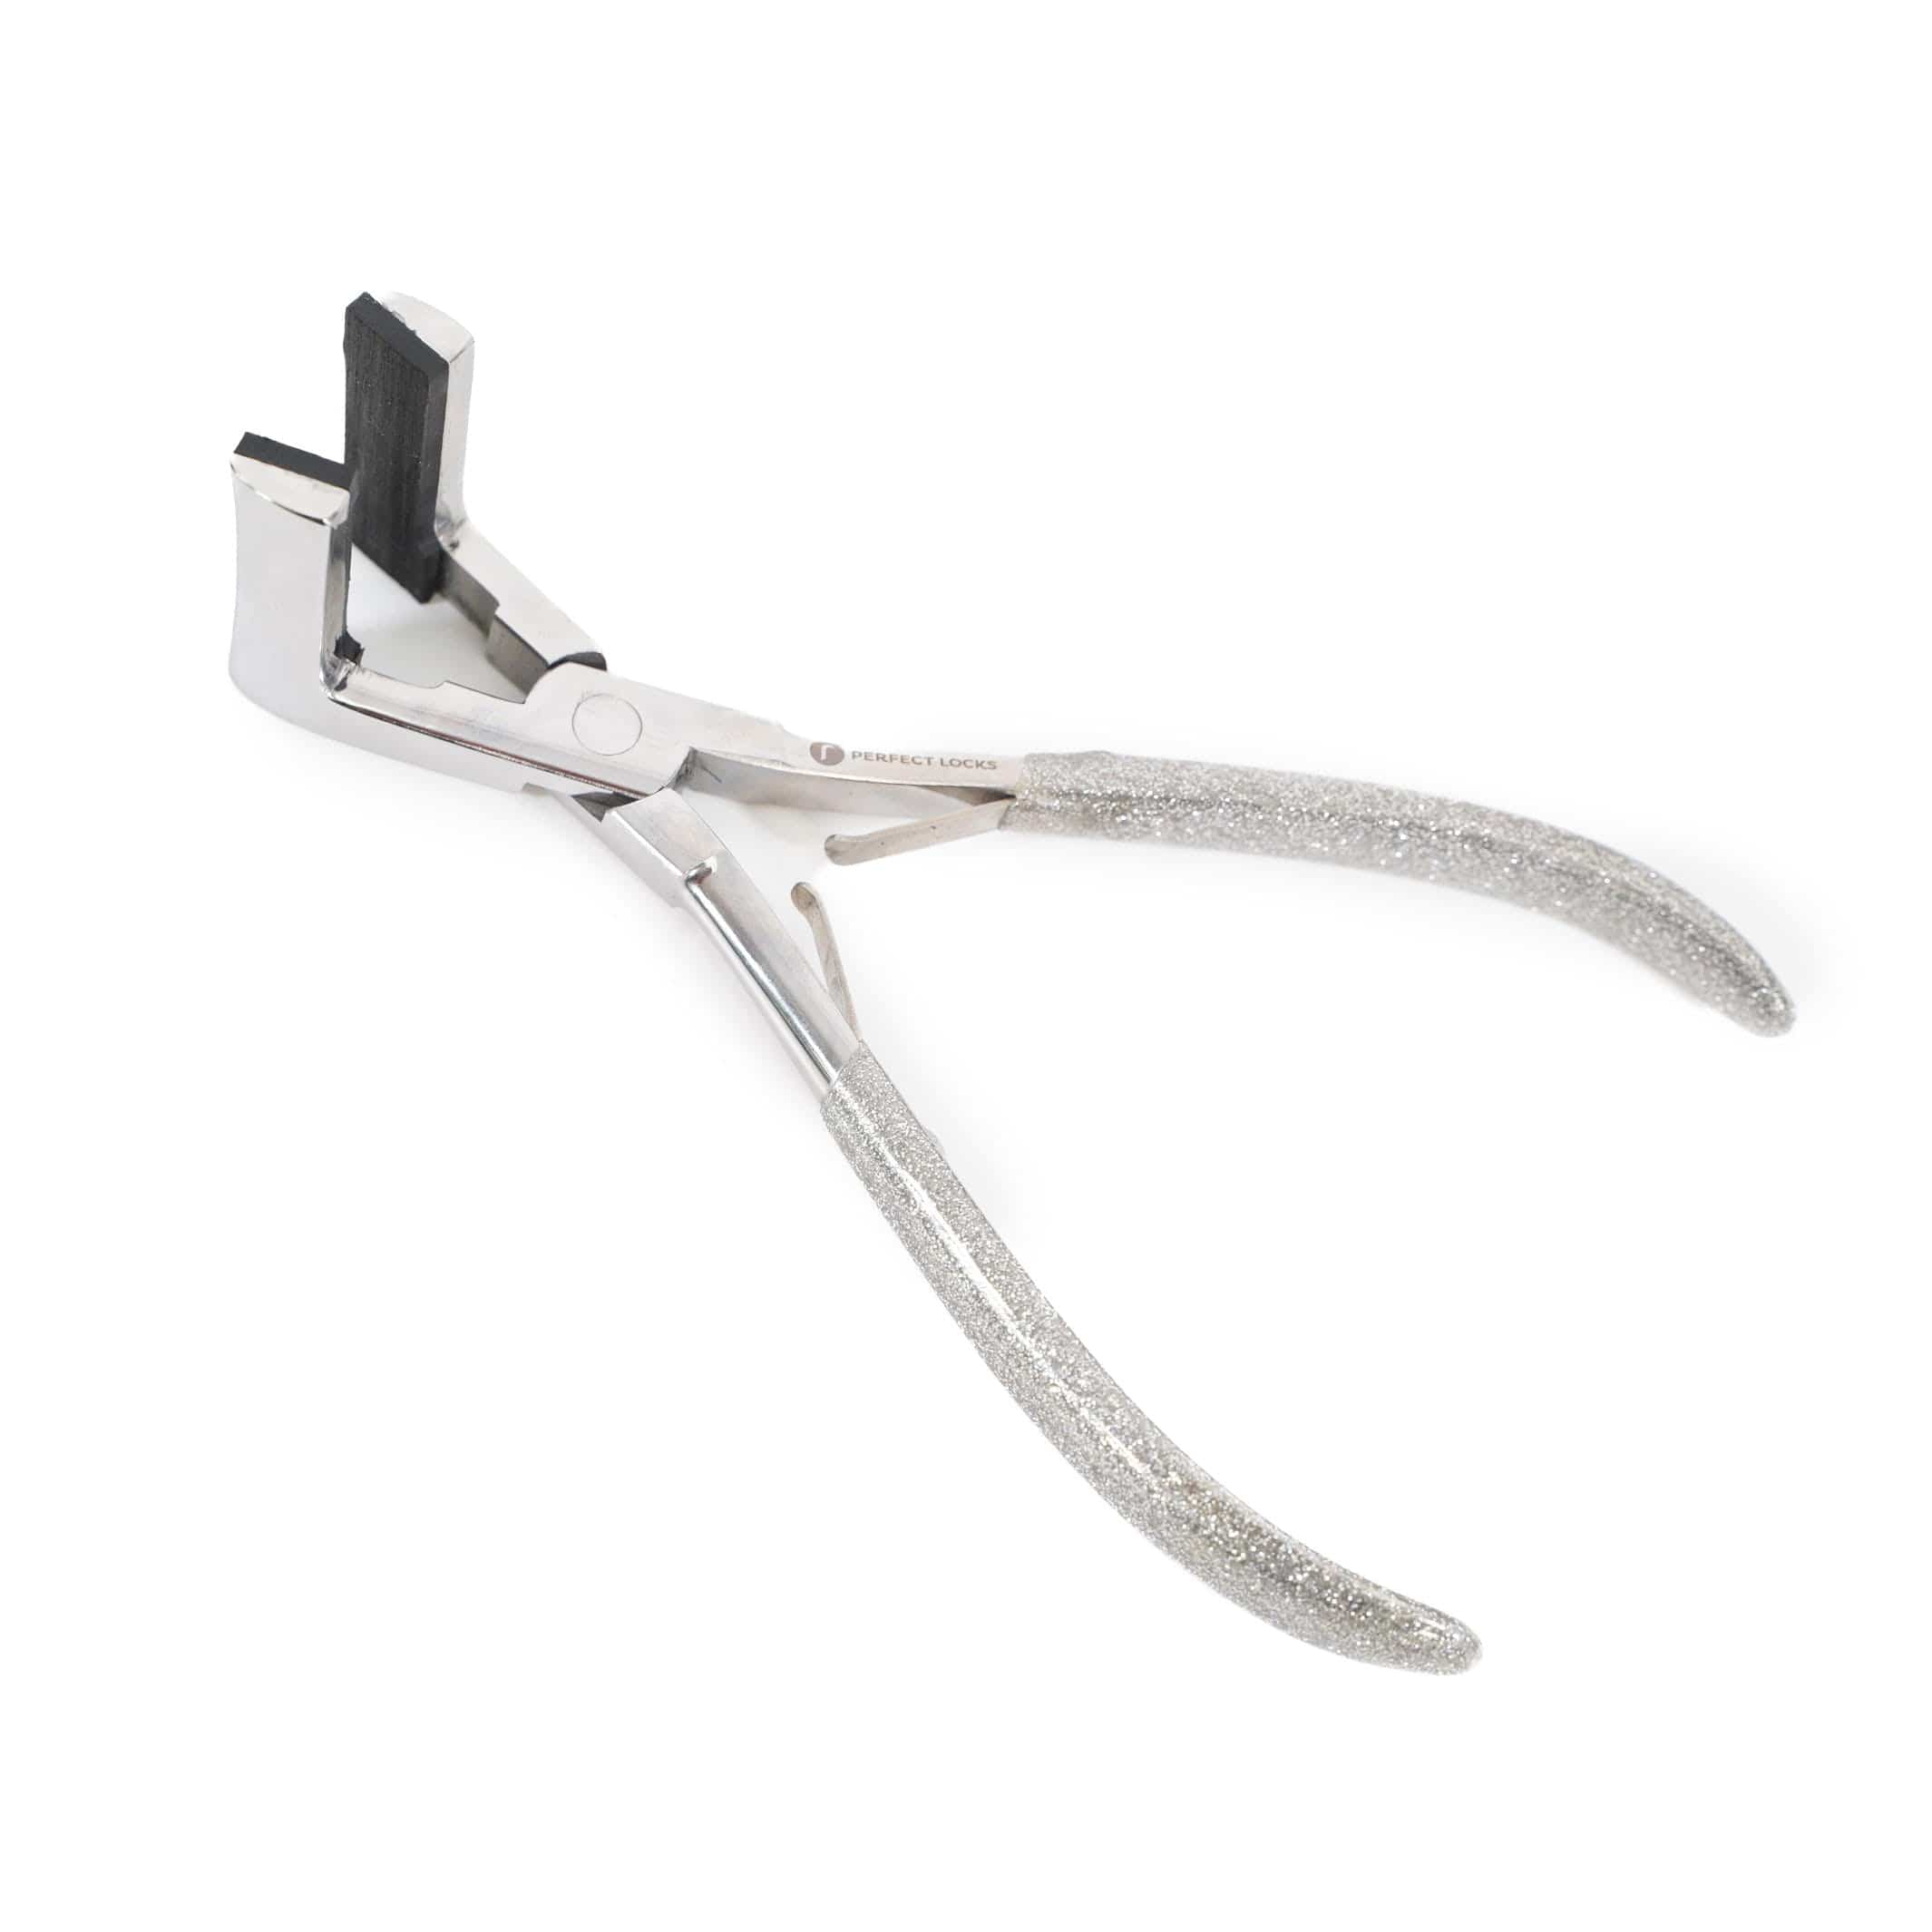 Tape-In Hair Extension Pliers (Upgraded Version) – Perfect Locks Pro